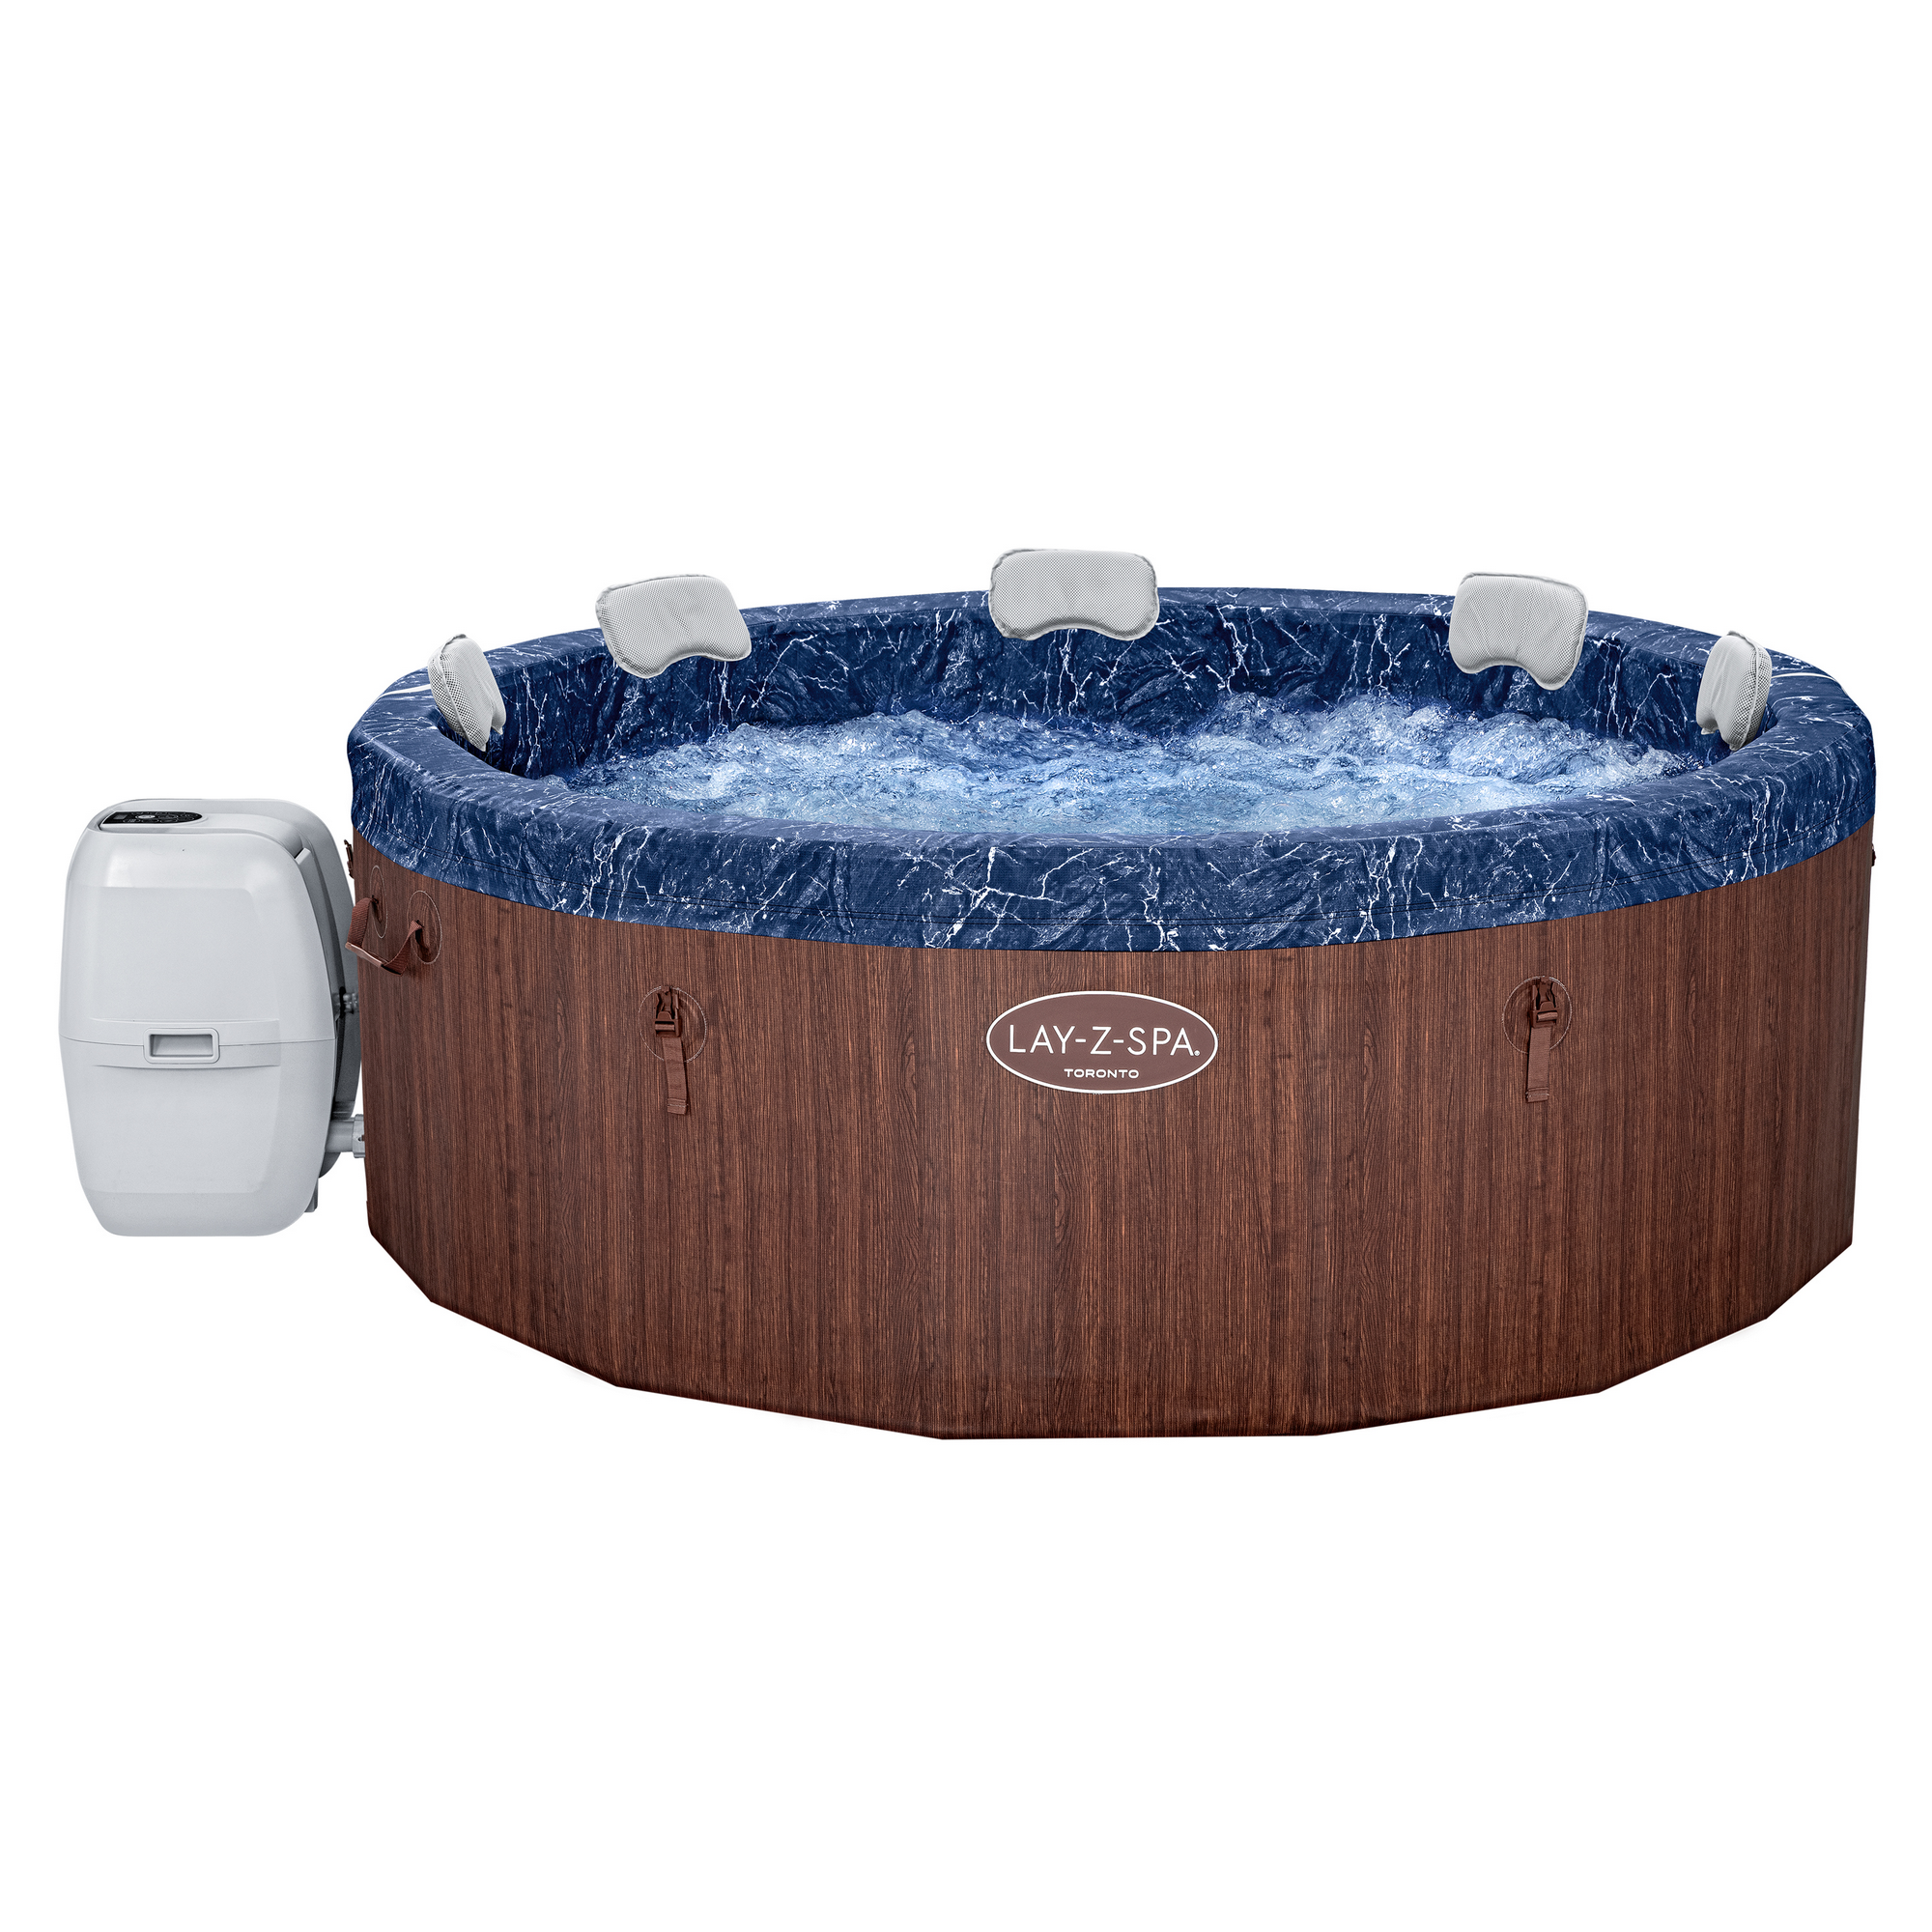 WLAN-Whirlpool 'LAY-Z-SPA ThermaCore Toronto AirJet Plus' Ø 190 x 70 cm braun + product picture